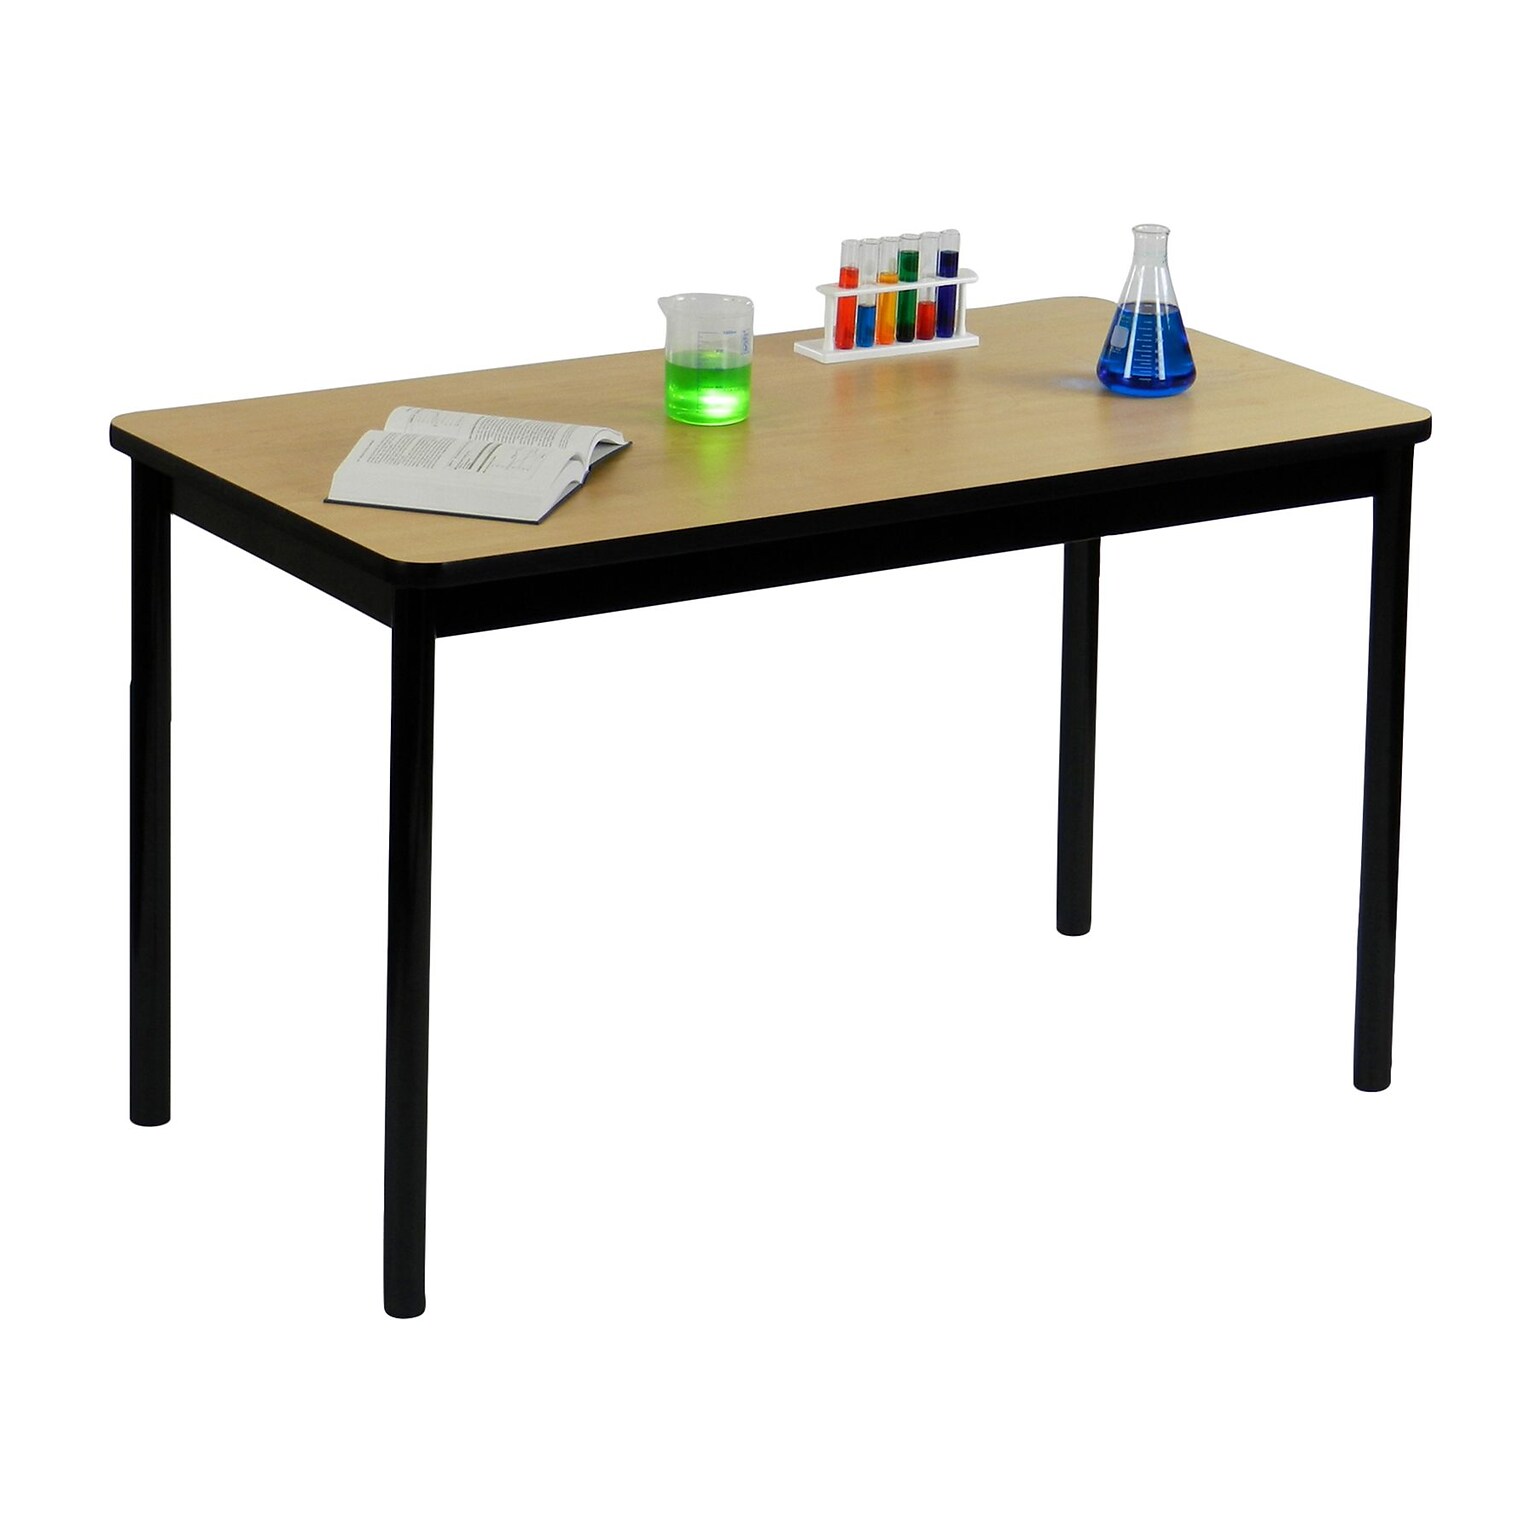 Correll, Inc. 72 Rectangular Shape High-Pressure Laminate Top Lab Table, Fusion Maple with Black Frame (LT2472)